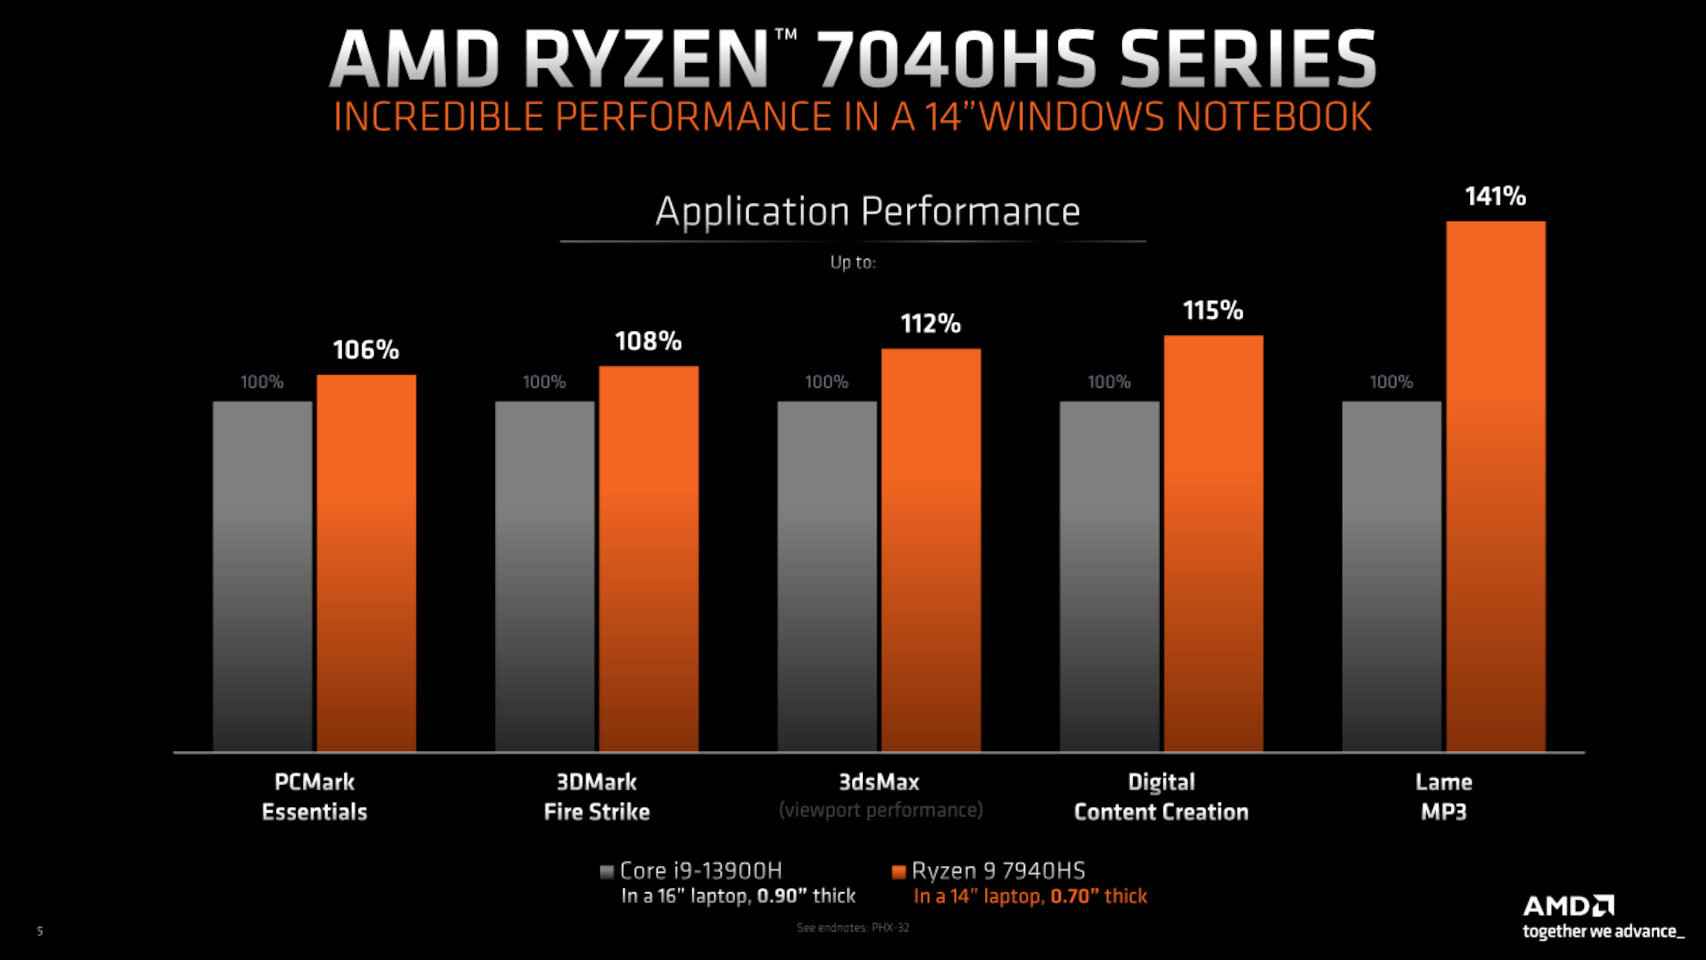 AMD promises more powerful CPUs than Intel in thinner, lighter laptops